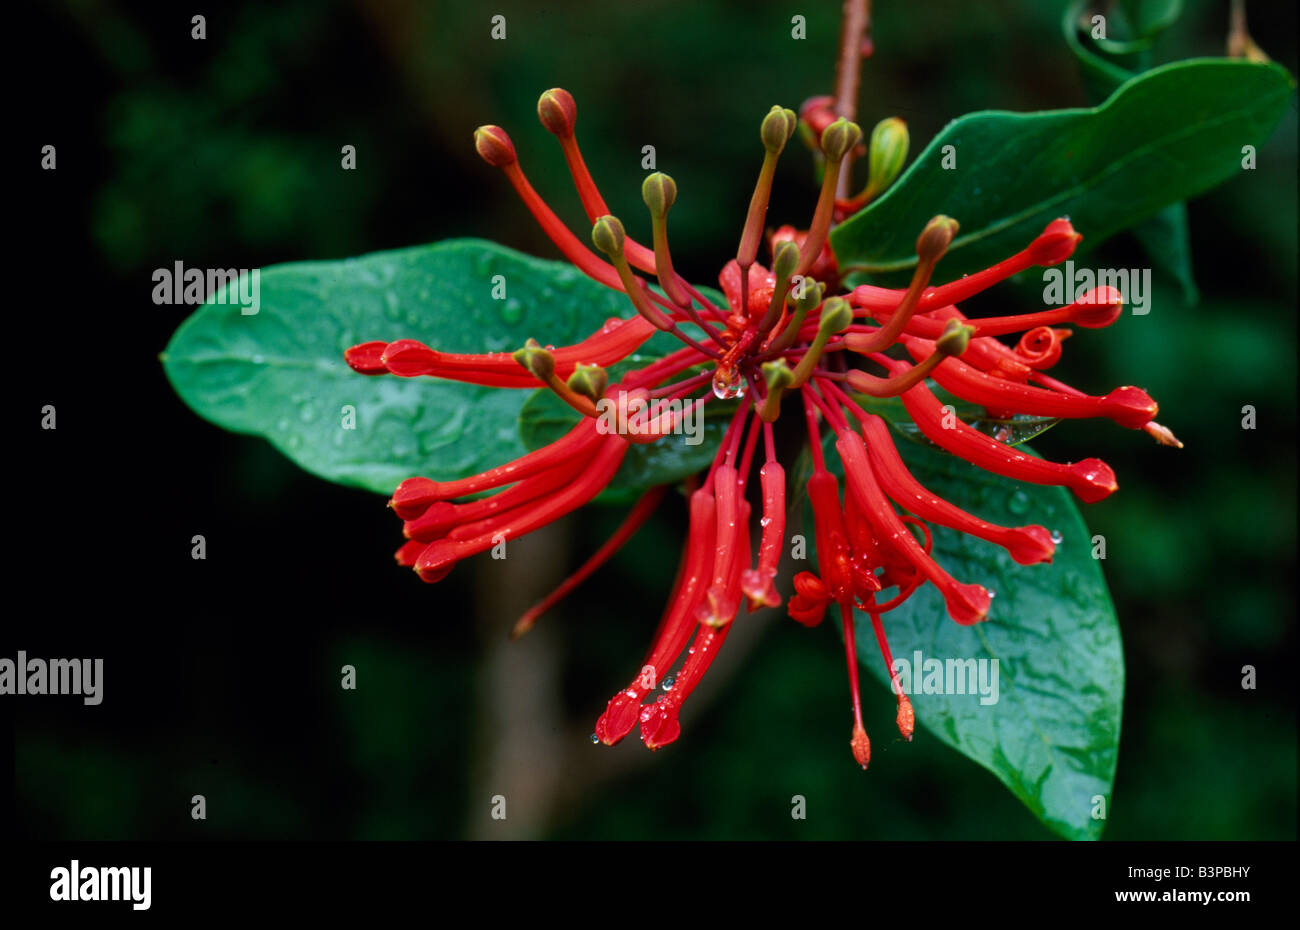 Chile, Northern Patagonia. Flower of Notro, Embothrium coccineum Stock Photo